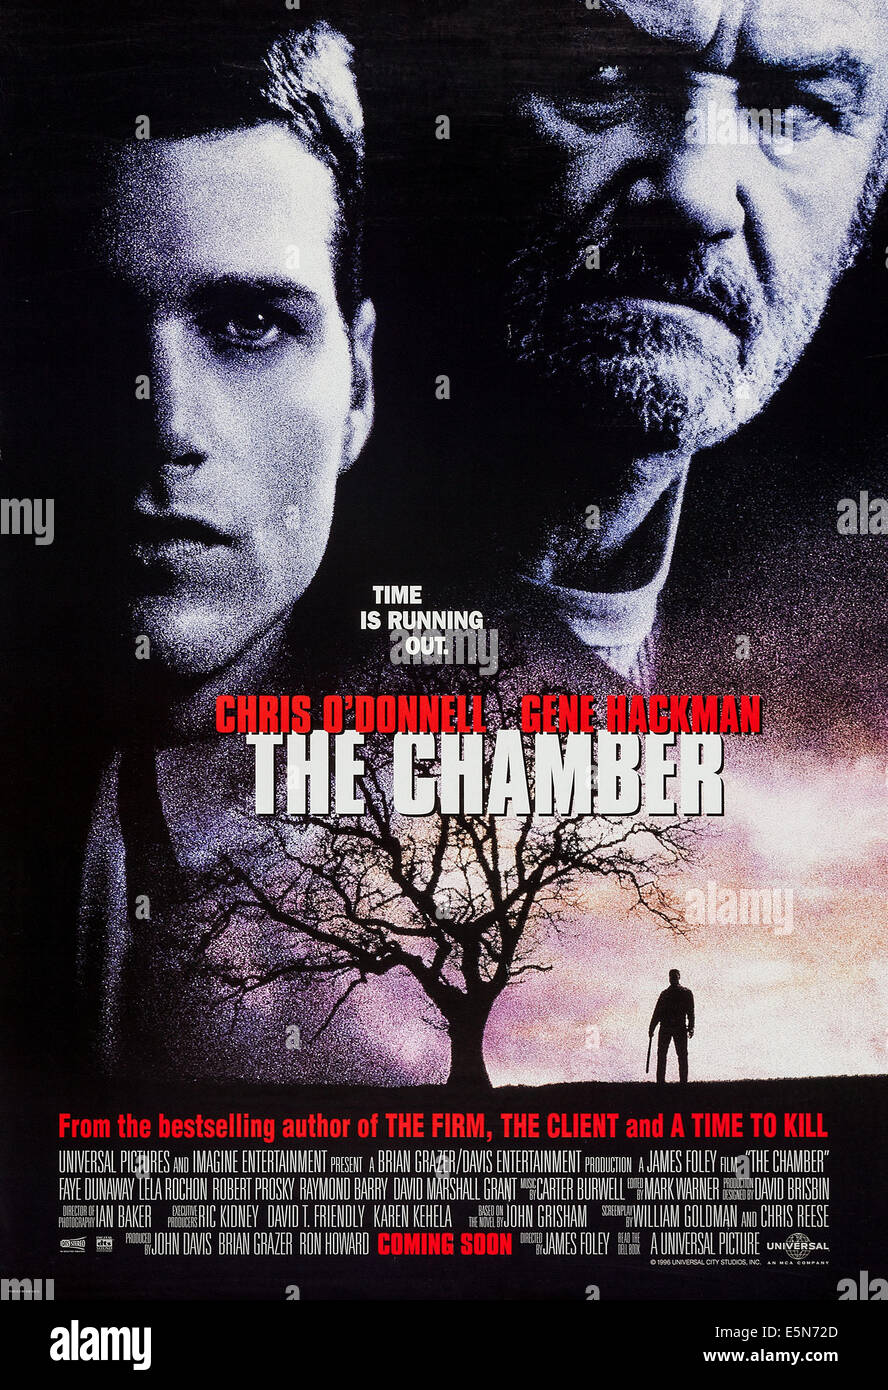 THE CHAMBER, US advance poster art, from left: Chris O'Donnell, Gene Hackman, 1996, © Universal/courtesy Everett Collection Stock Photo